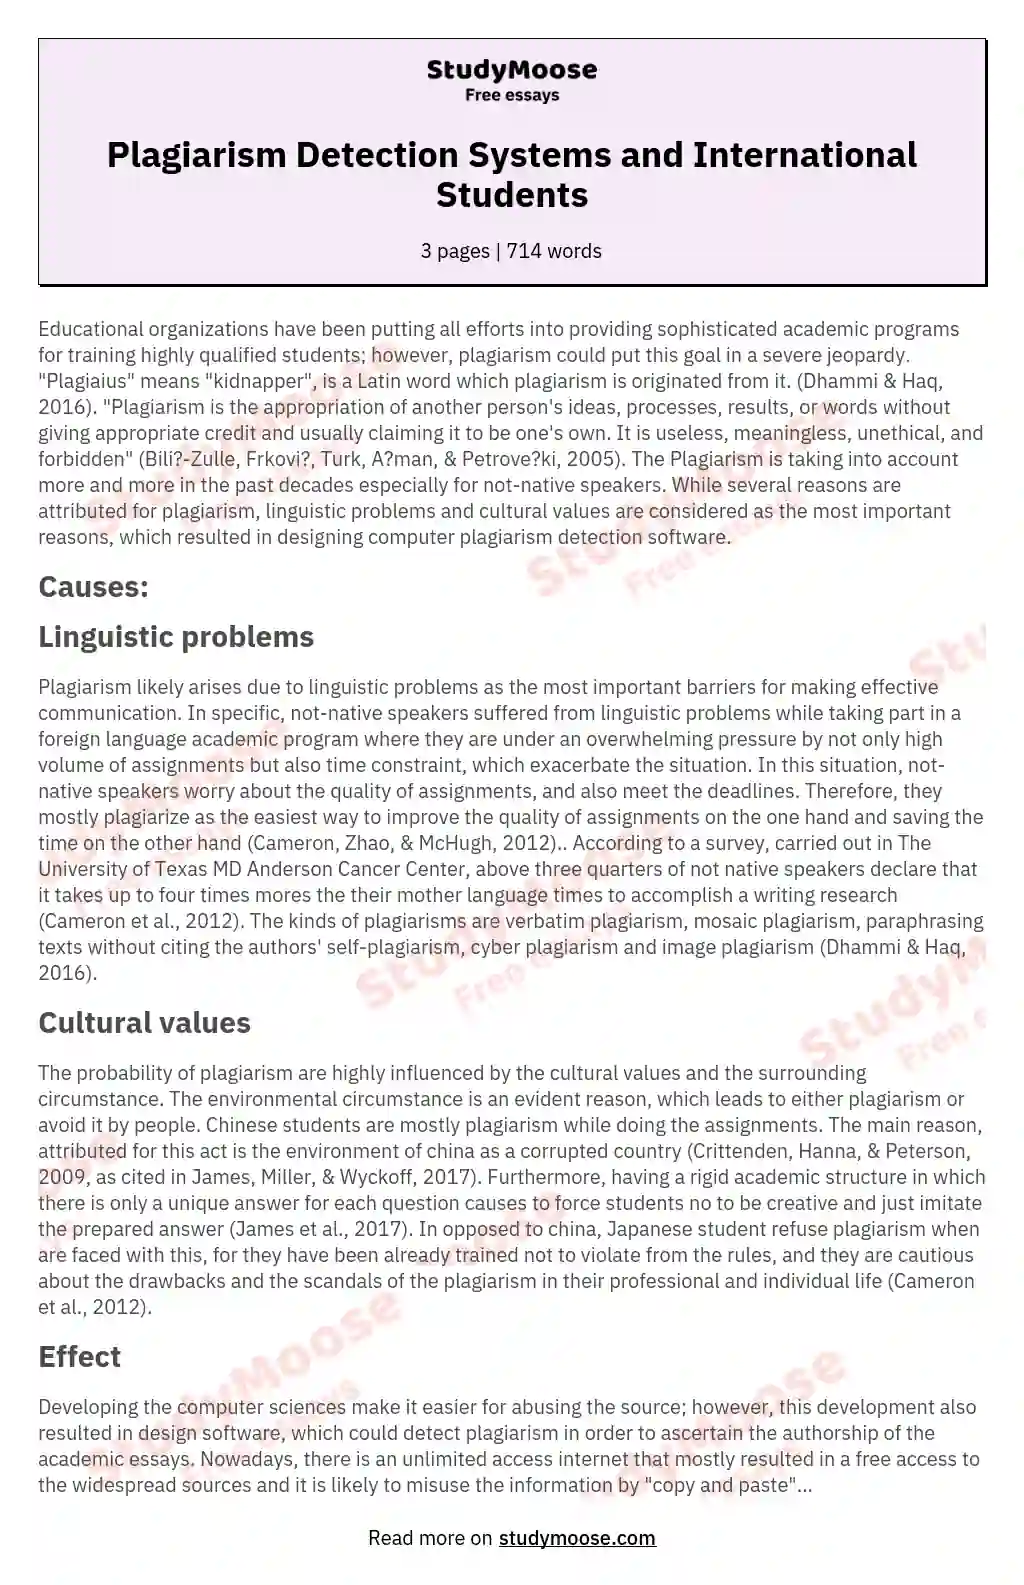 Plagiarism Detection Systems and International Students essay